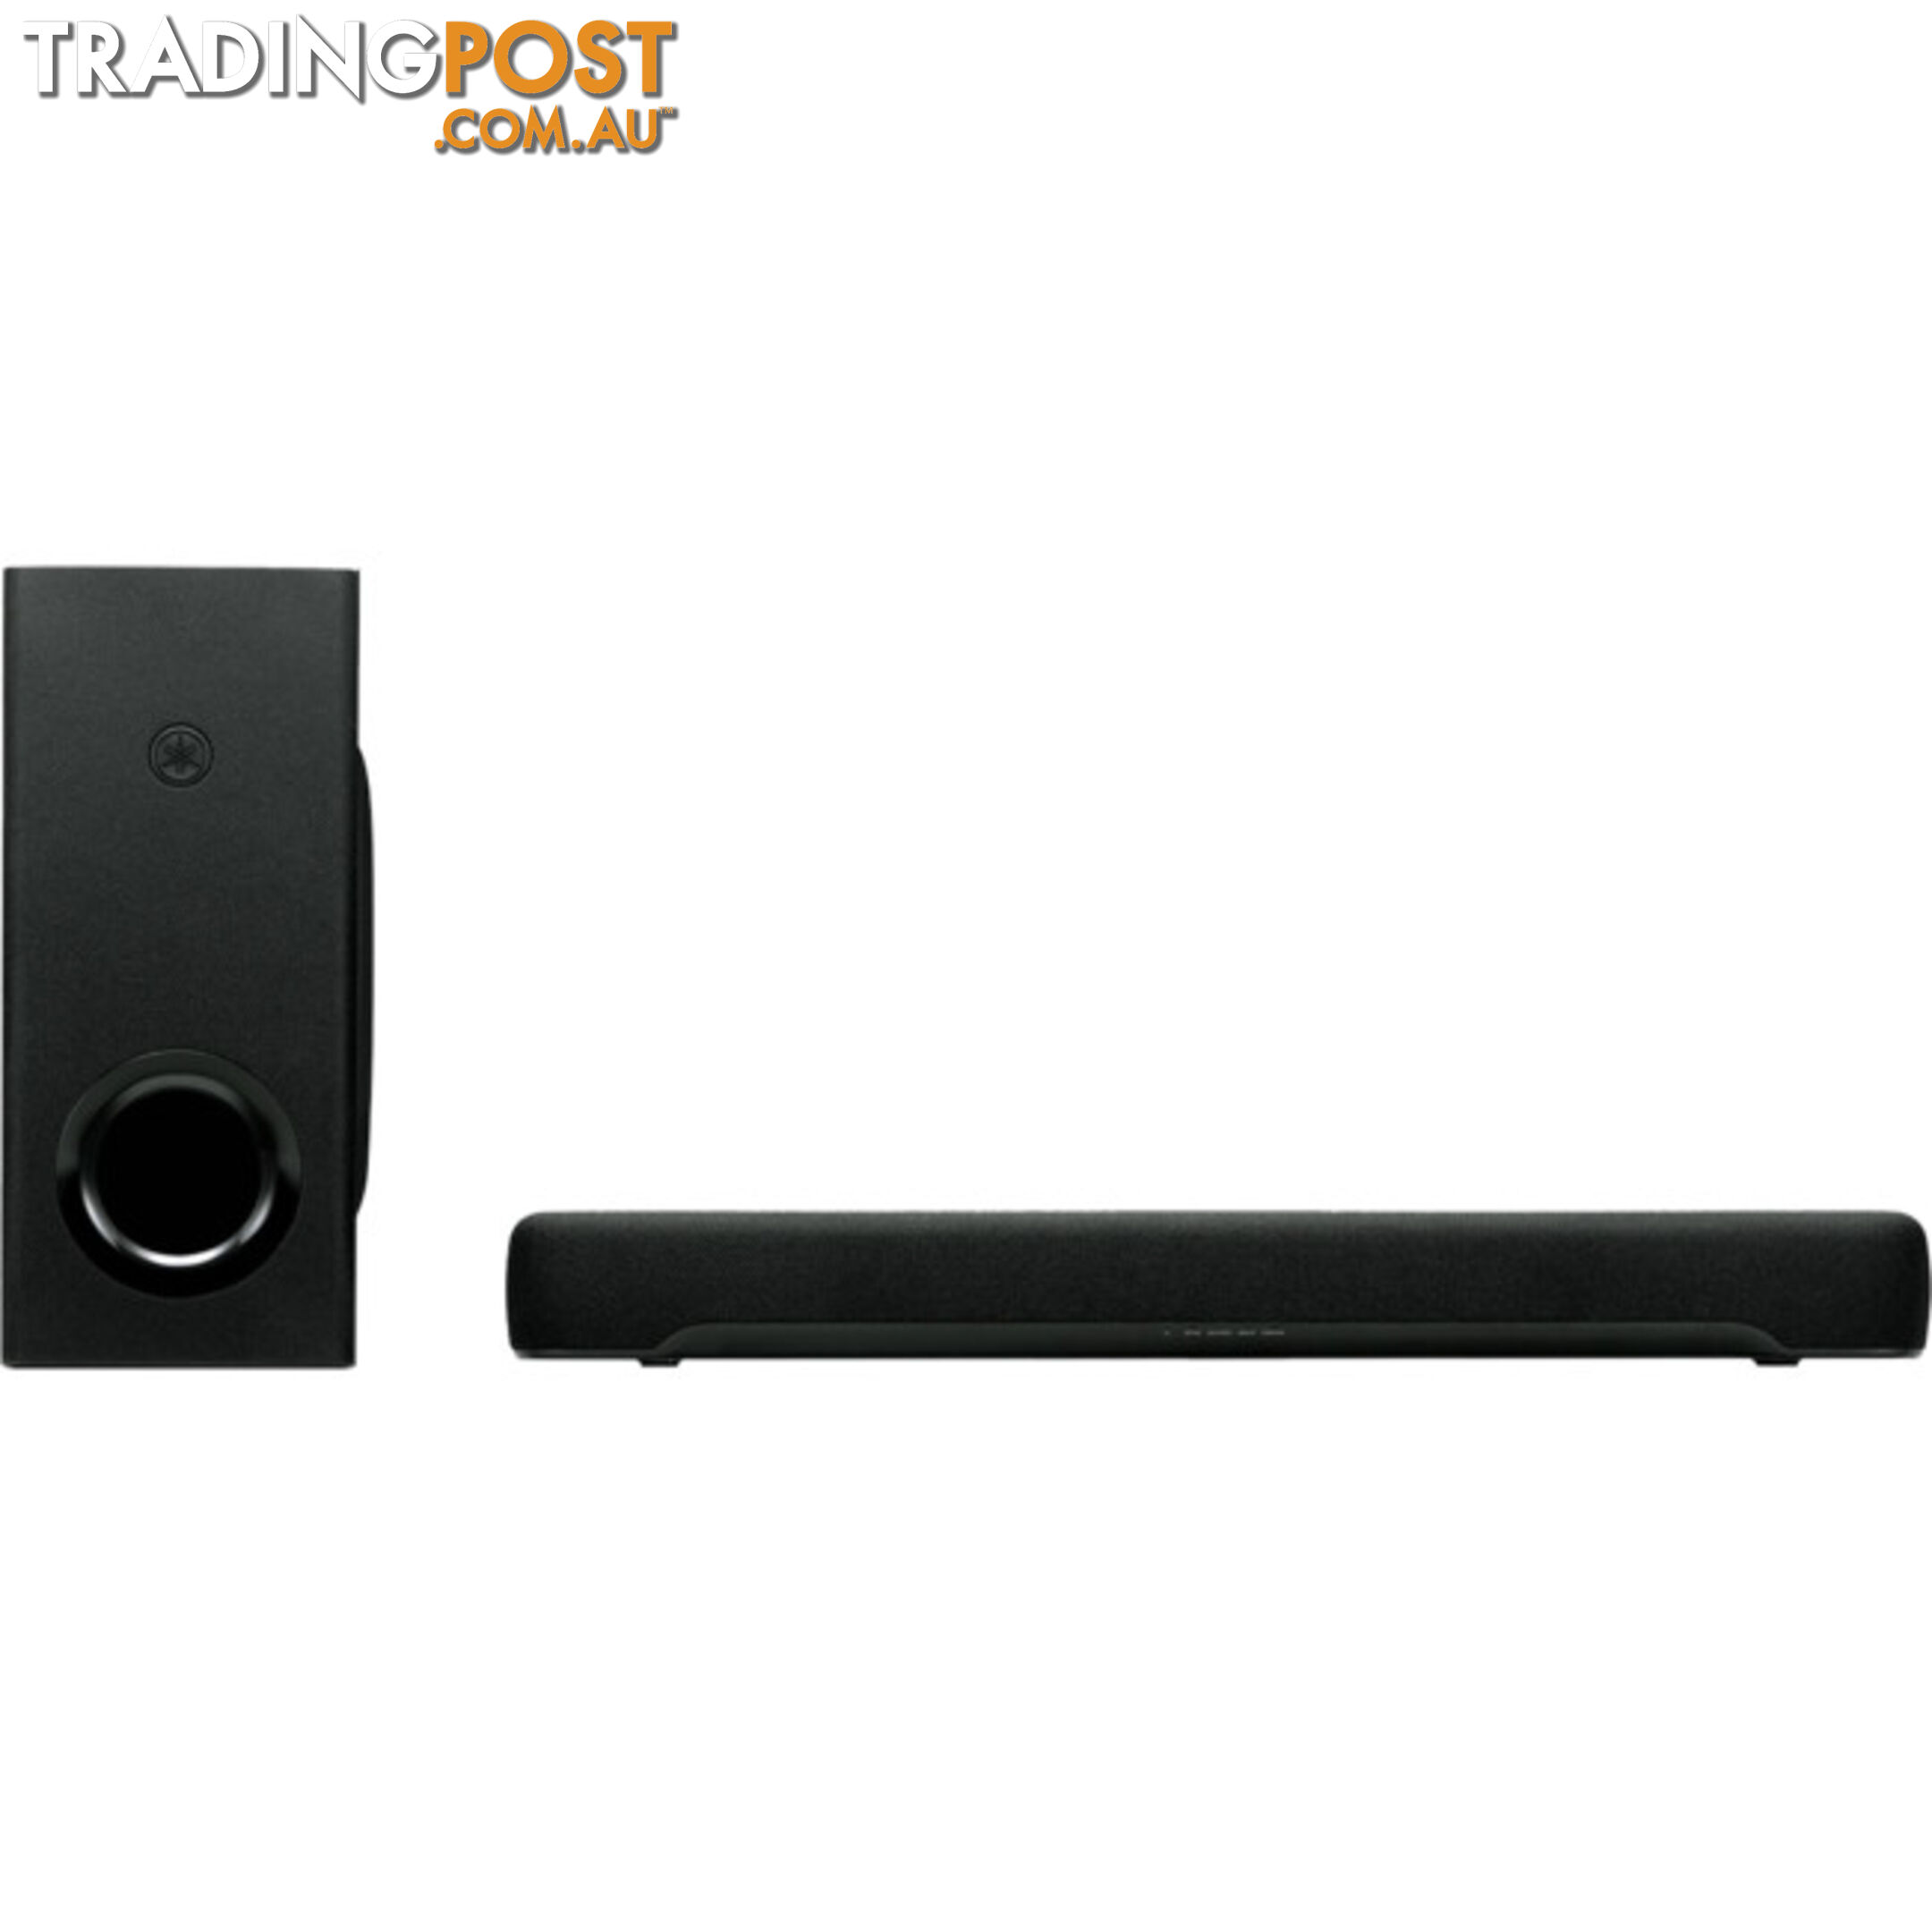 SRC30A COMPACT SOUND BAR AND WIRELESS SUBWOOFER